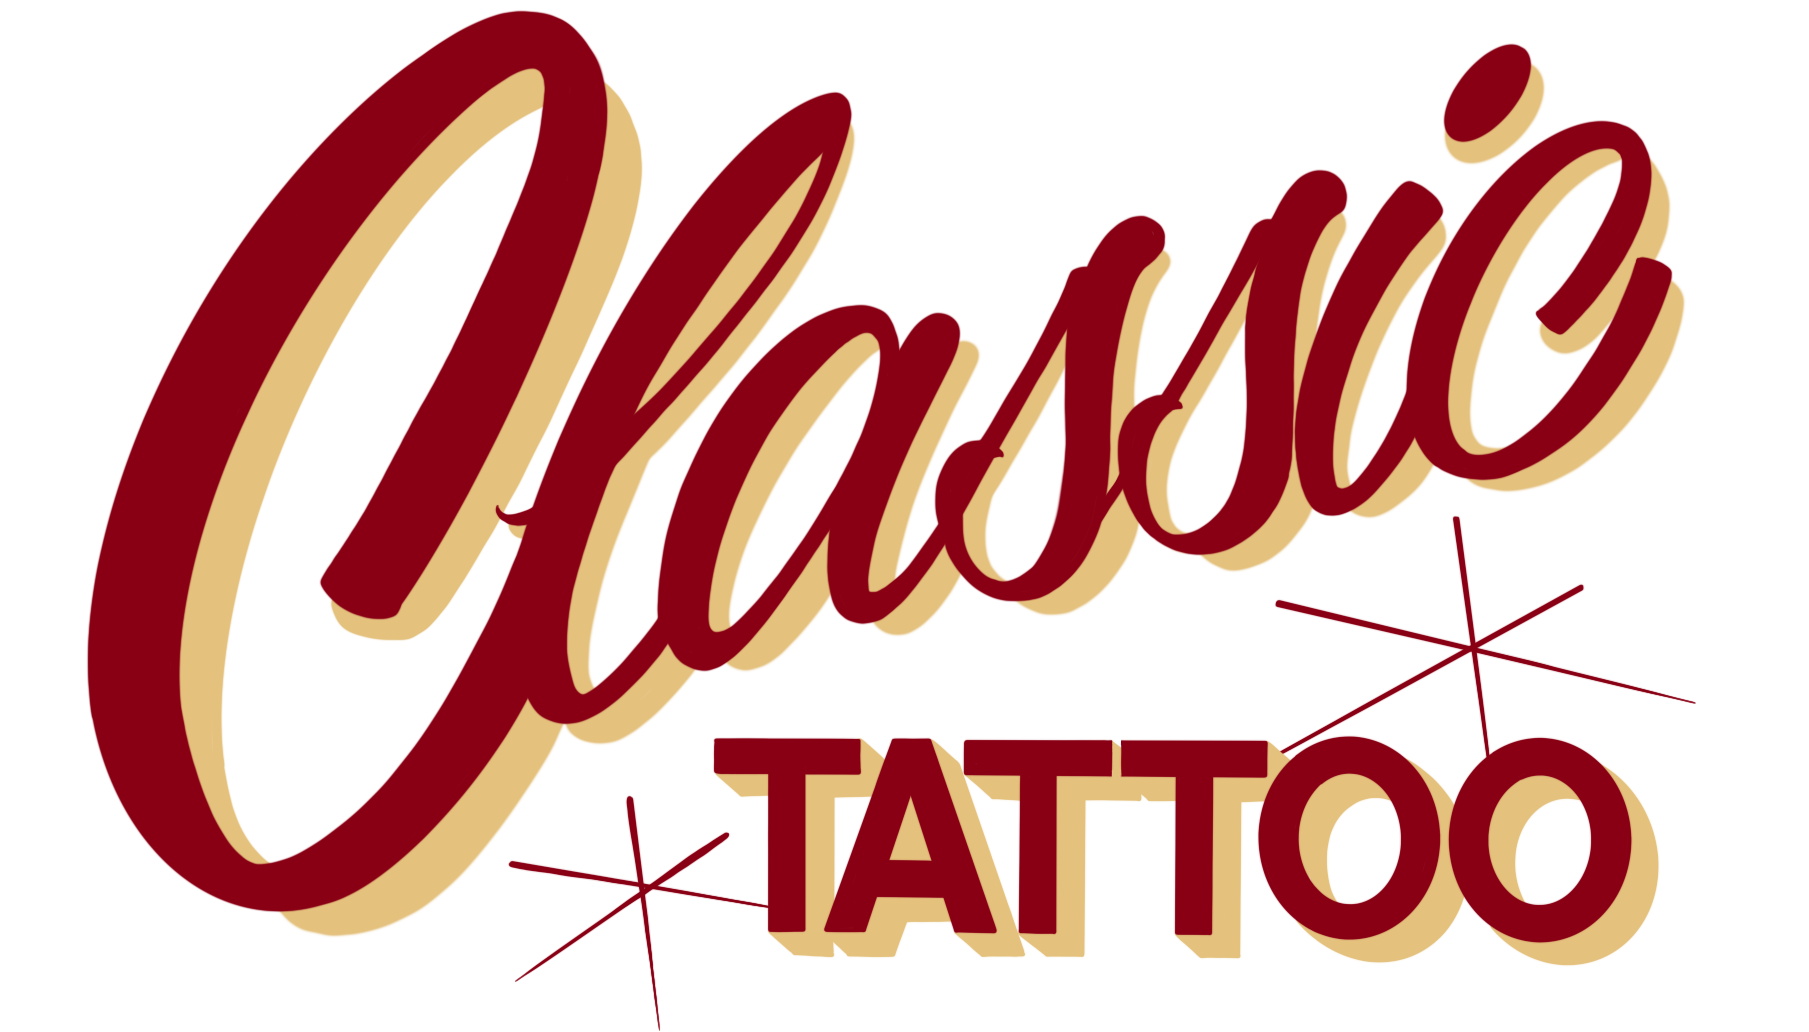 Tattoo logo Template | PosterMyWall